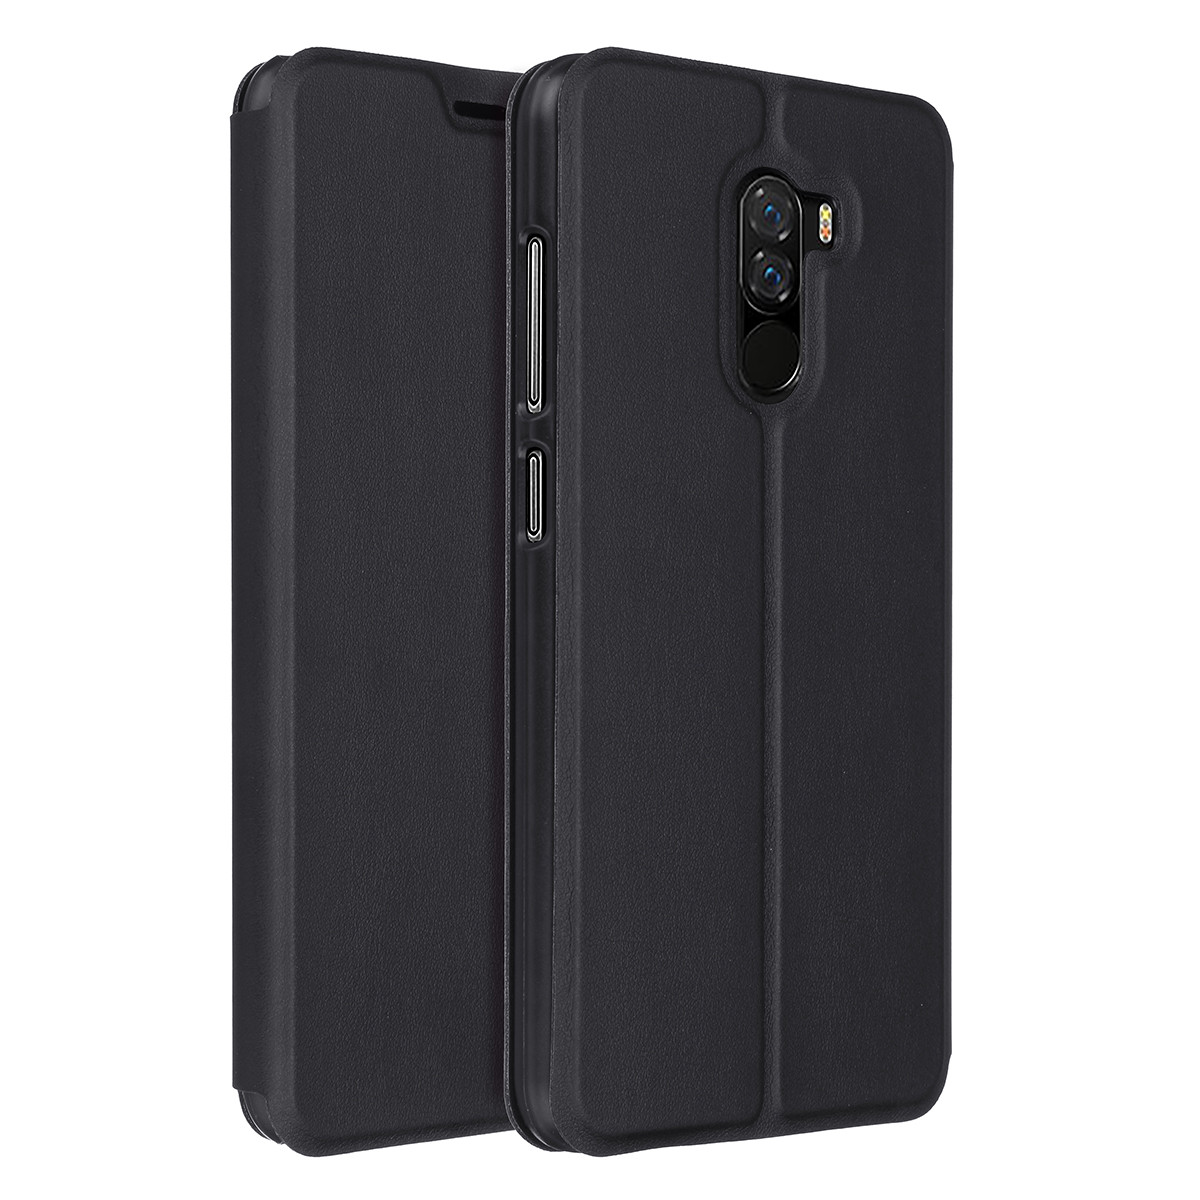 

Bakeey Flip Shockproof Full Cover PU Leather Protective Case For Xiaomi Pocophone F1 Non-original